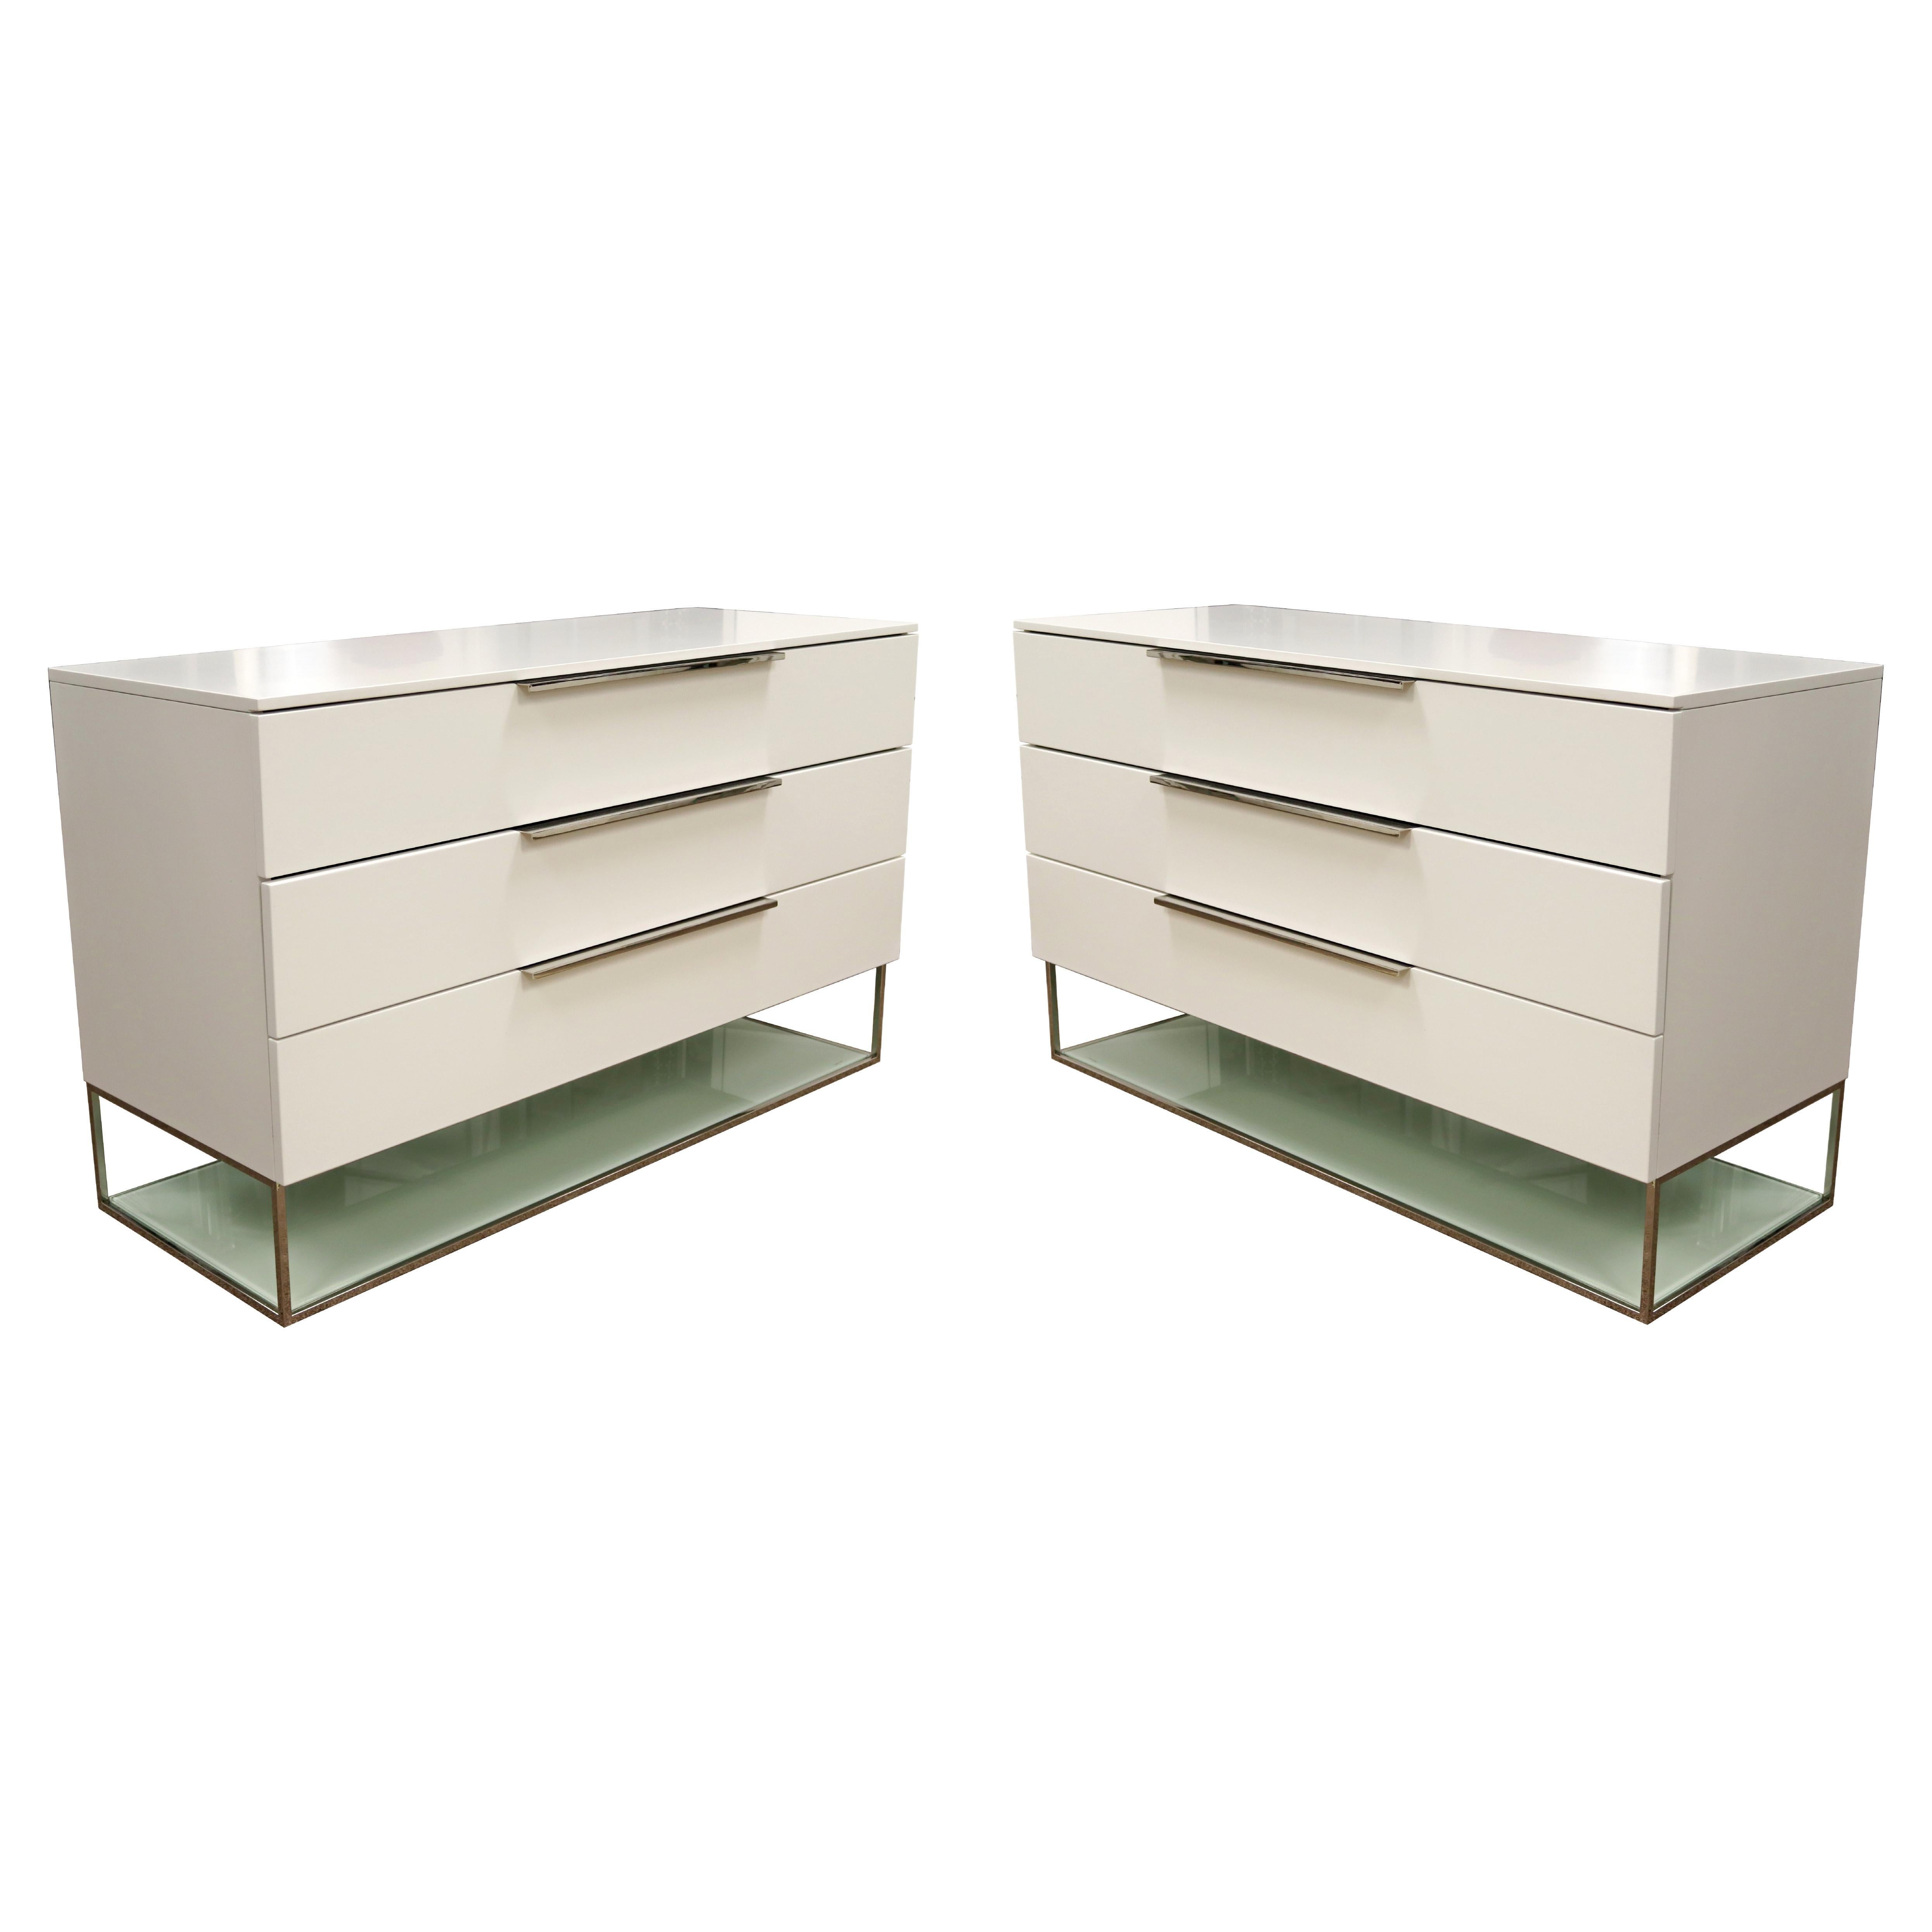 Contemporary Modern Pair of White Dressers Nightstands Chrome Accents 3 Drawers